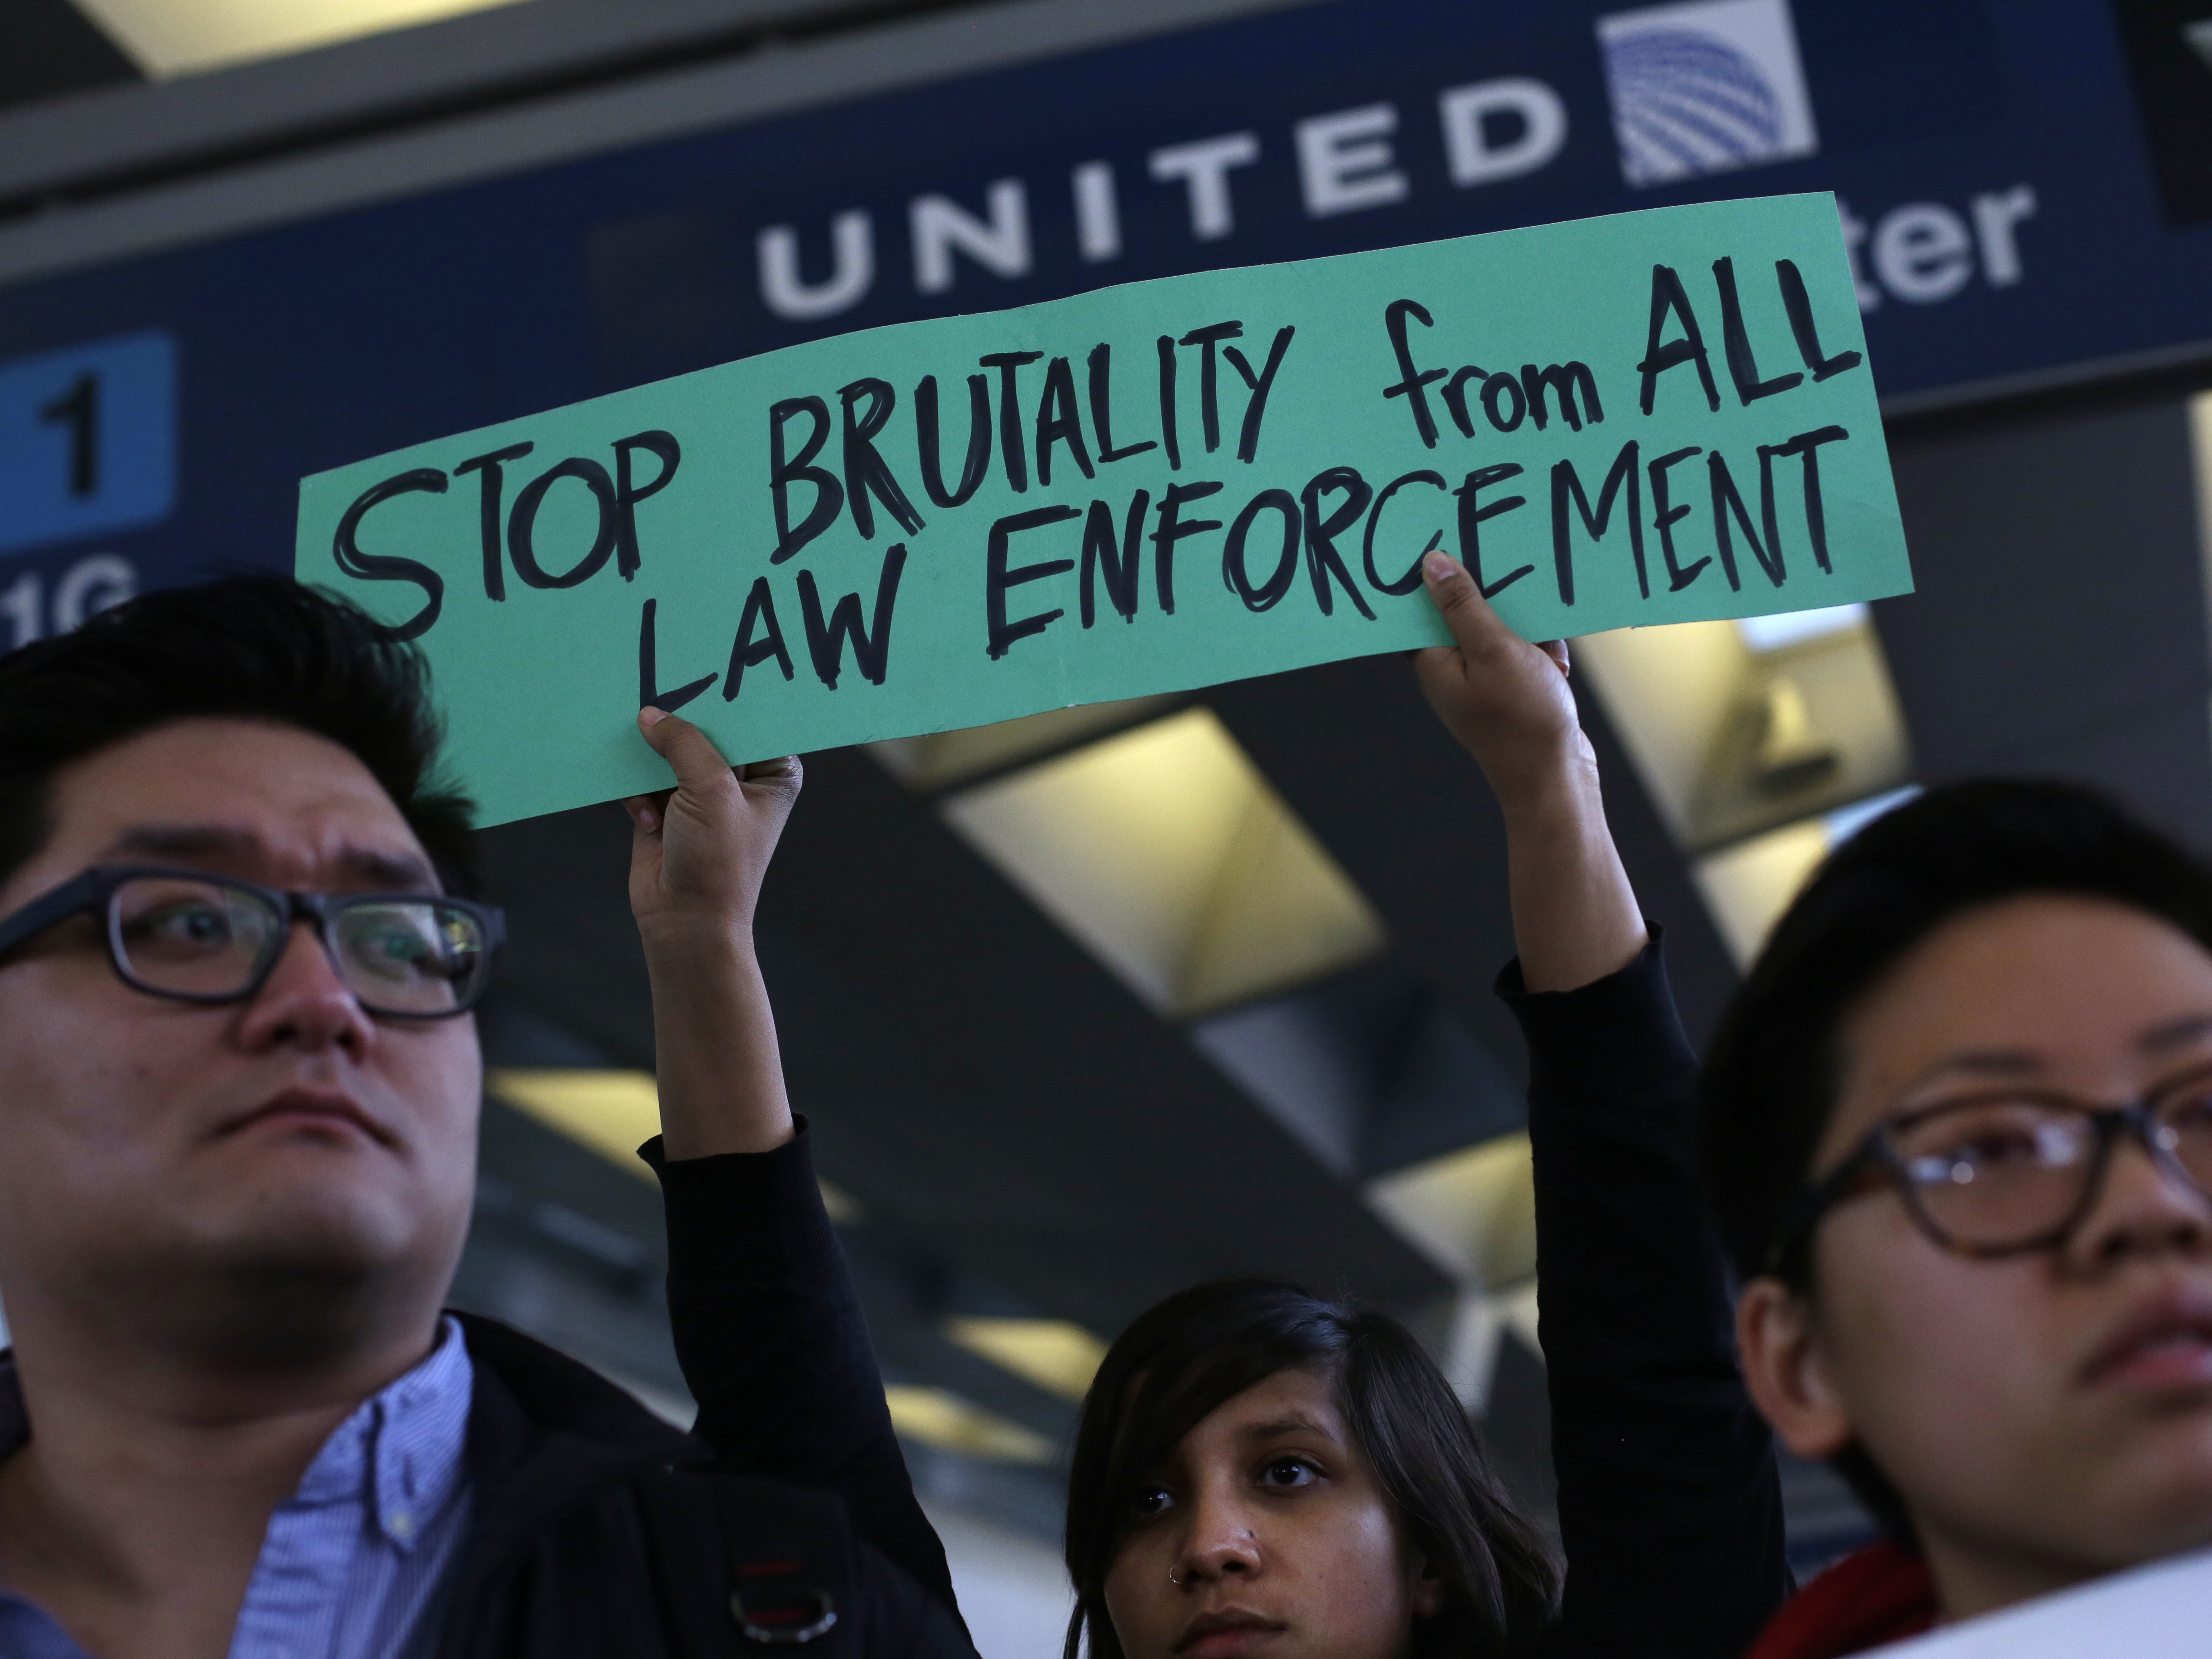 Demonstrators protest United Airlines at O'Hare International Airport on April 11, 2017 in Chicago, Illinois. (Photo: AFP/Getty Images, Joshua Lott)